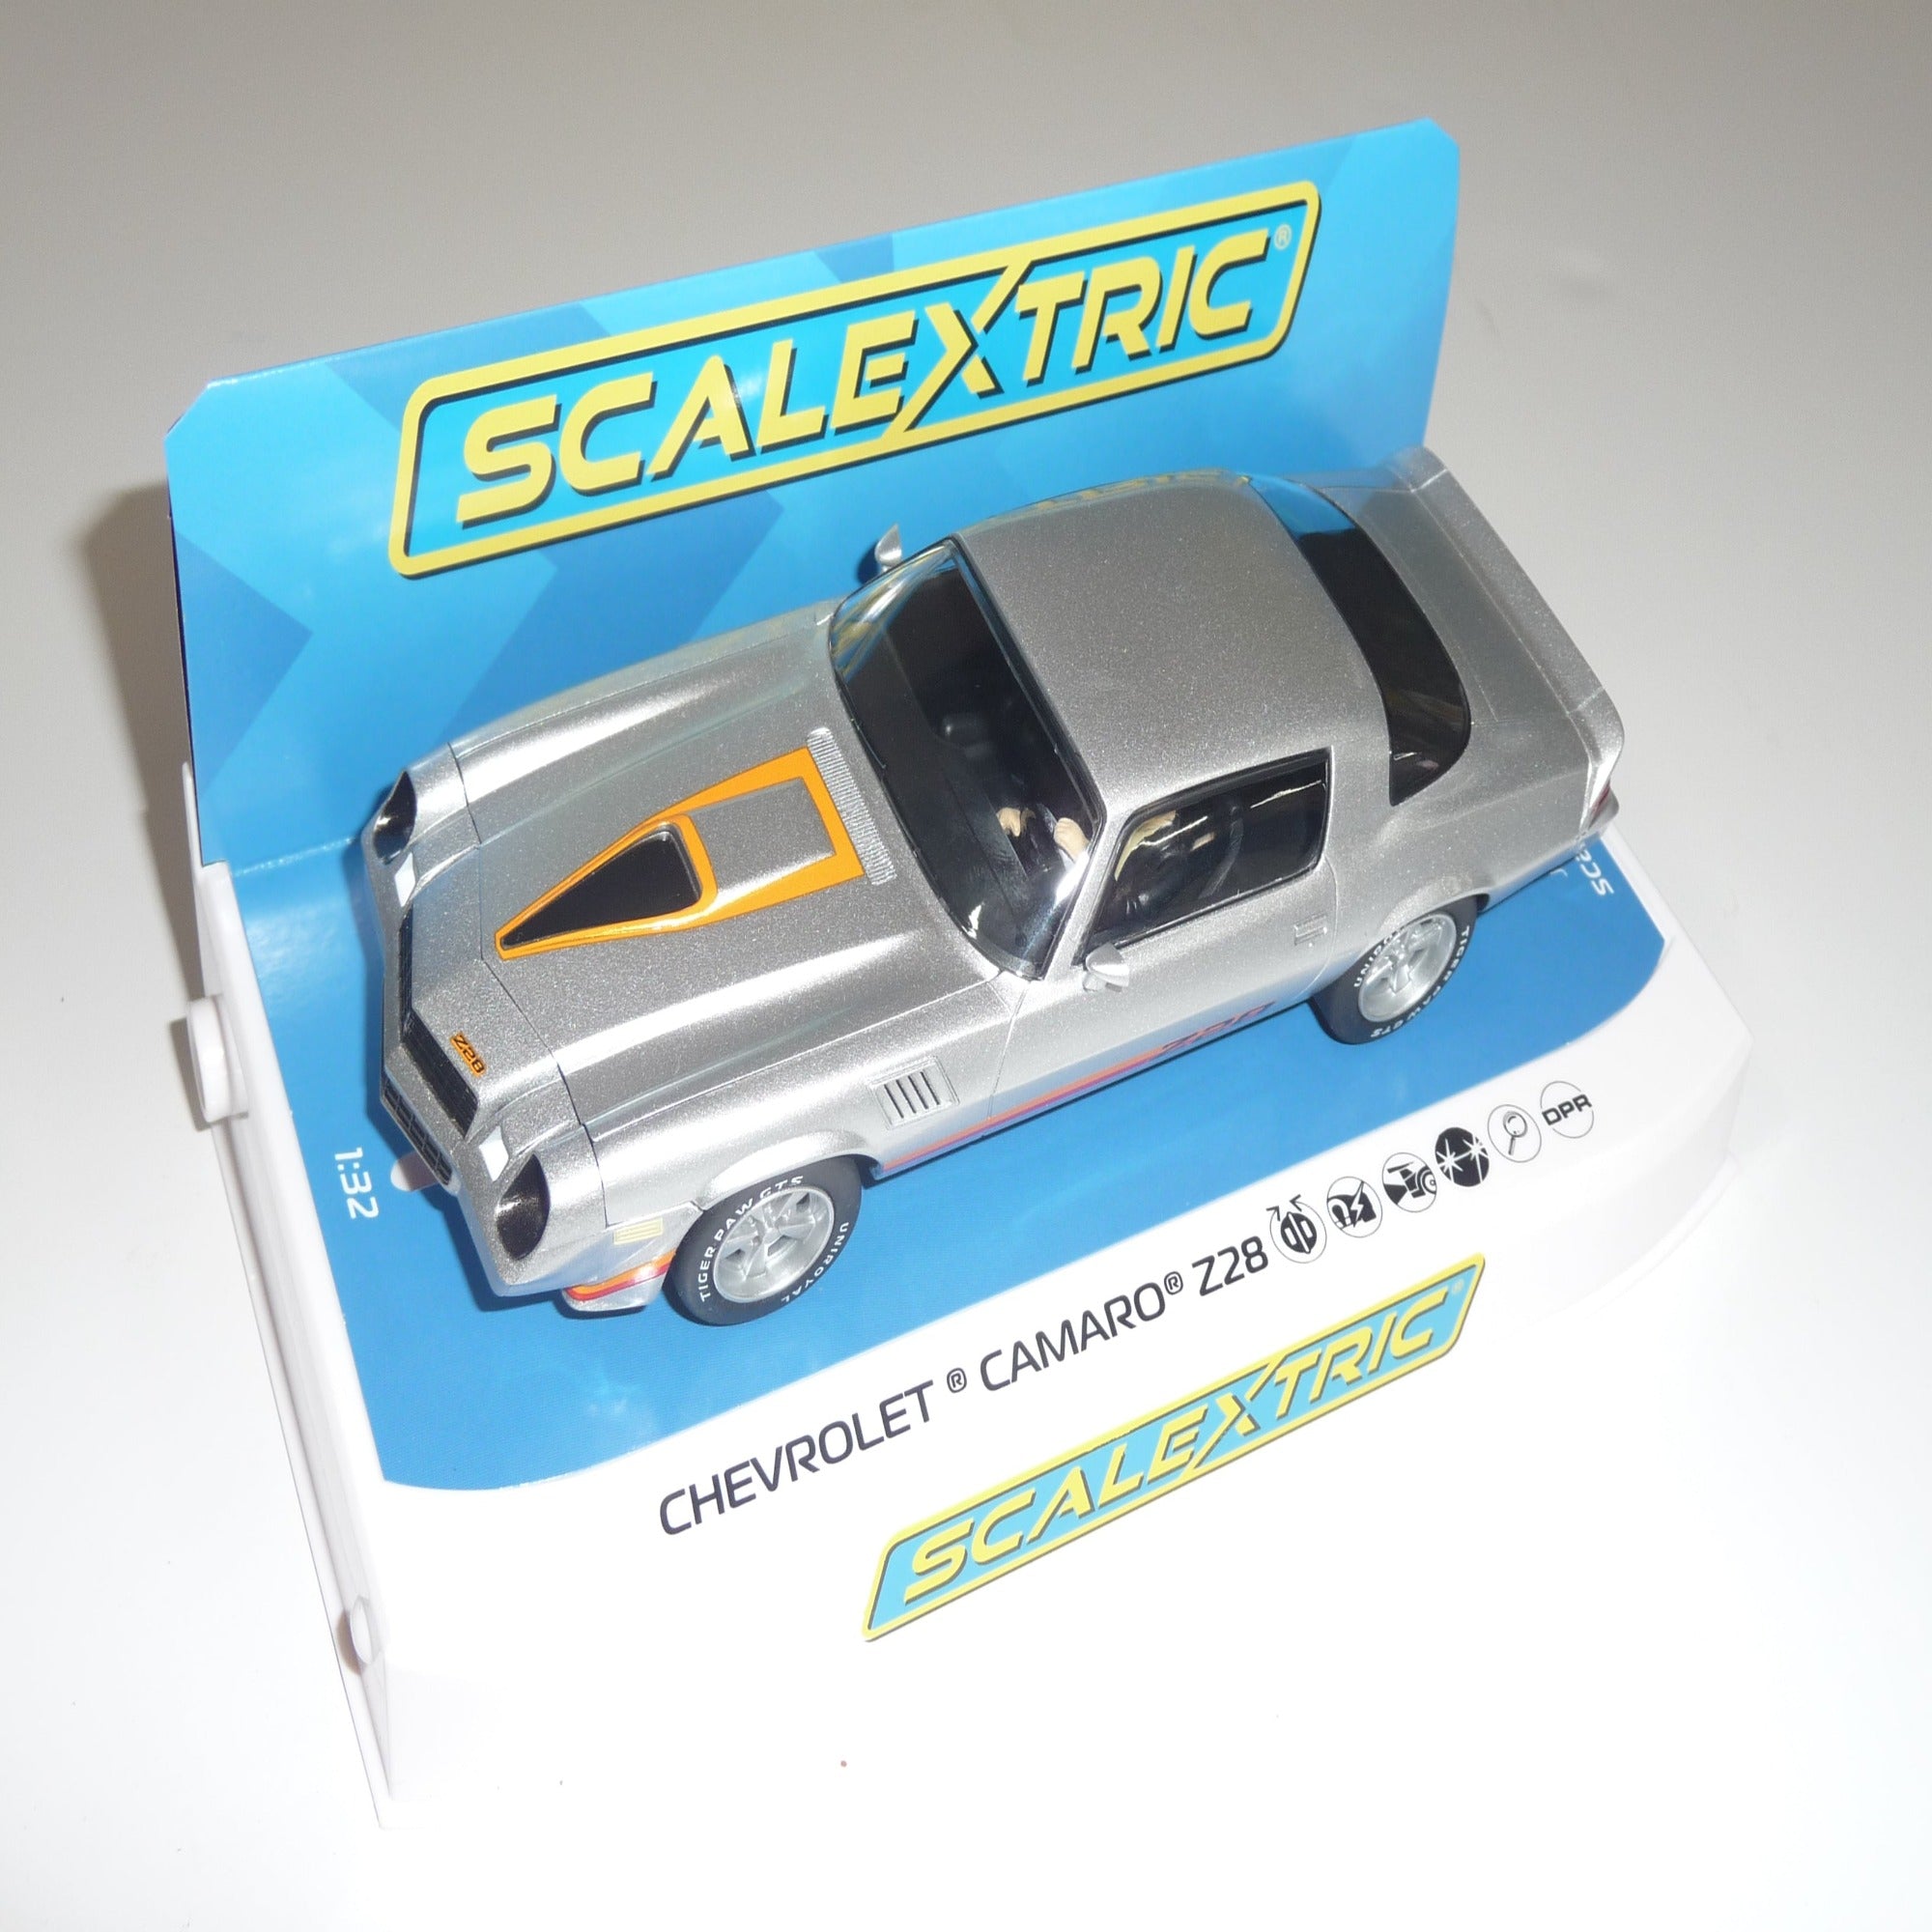 Scalextric Camaro Z28 C4227  Free Postage on Orders over $40